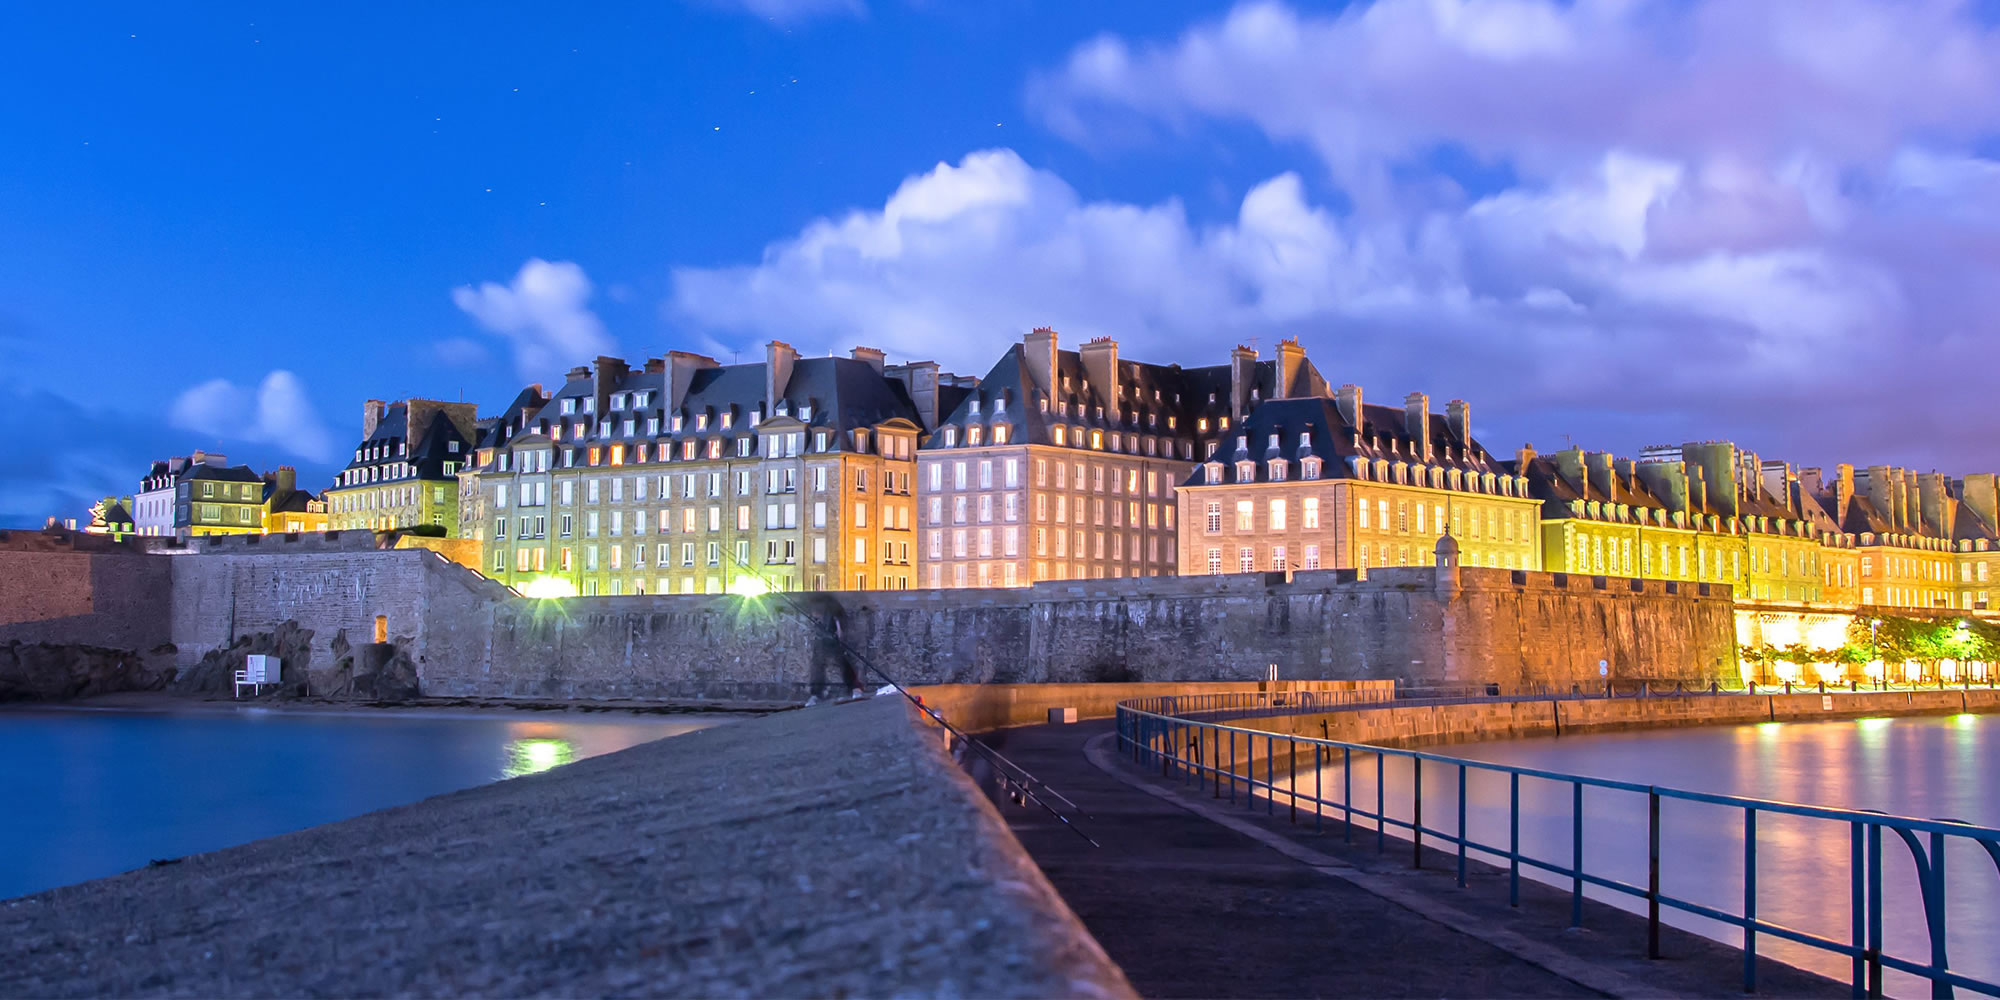 To access the Hotel des Abers in Saint Malo